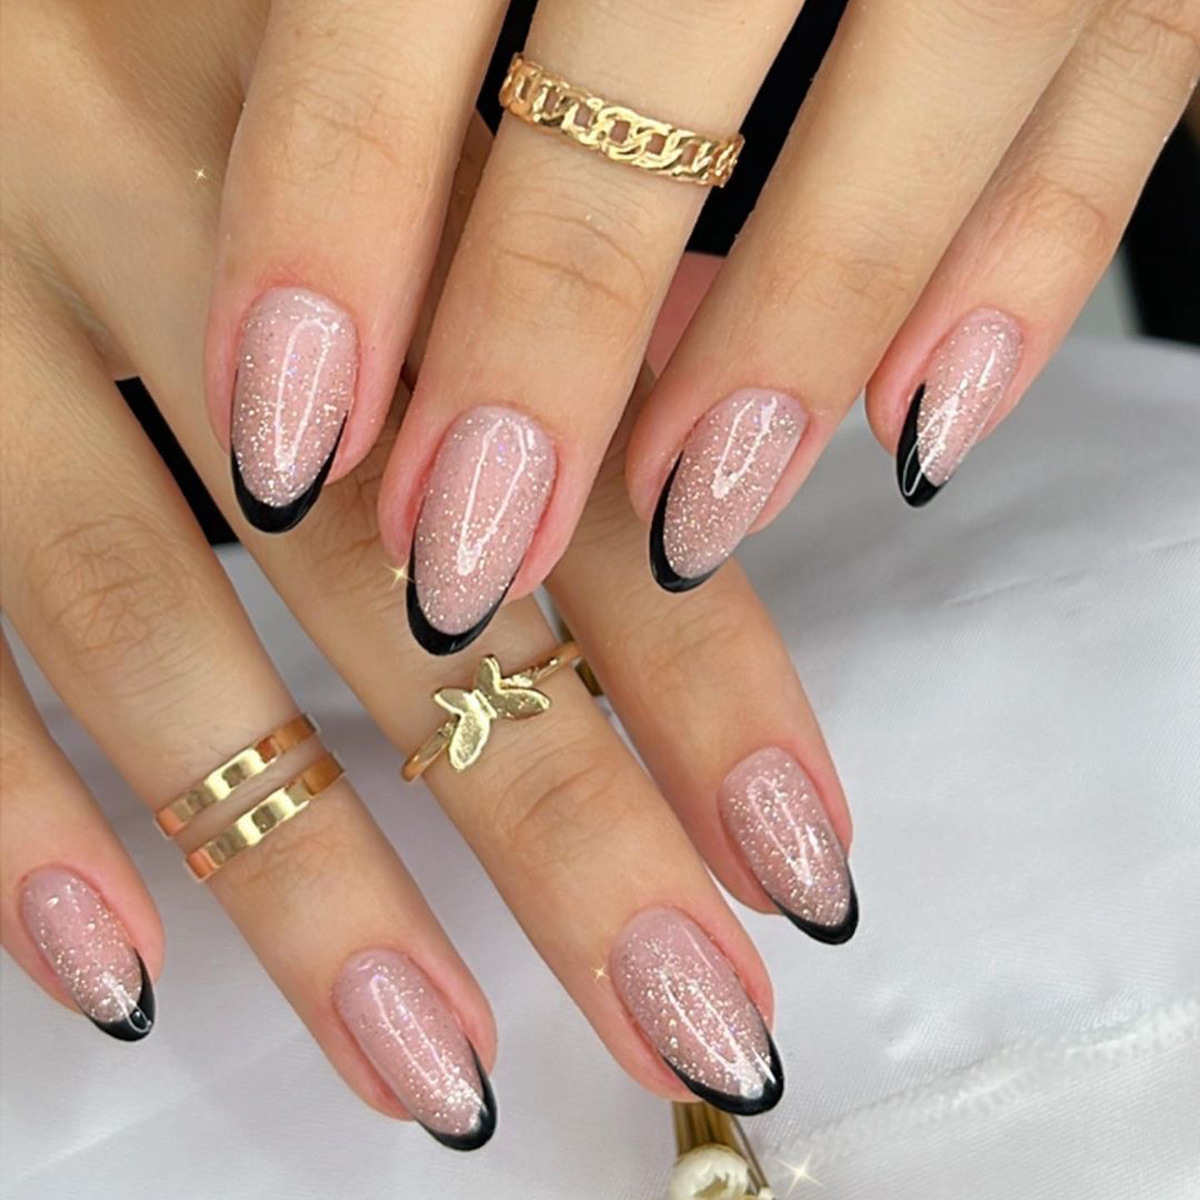 JP2670 Glossy Press on Nails, Short Round Black Pink Glitter French Style Fake Nails, Full Cover Artificial False Nails for Women and Girls
